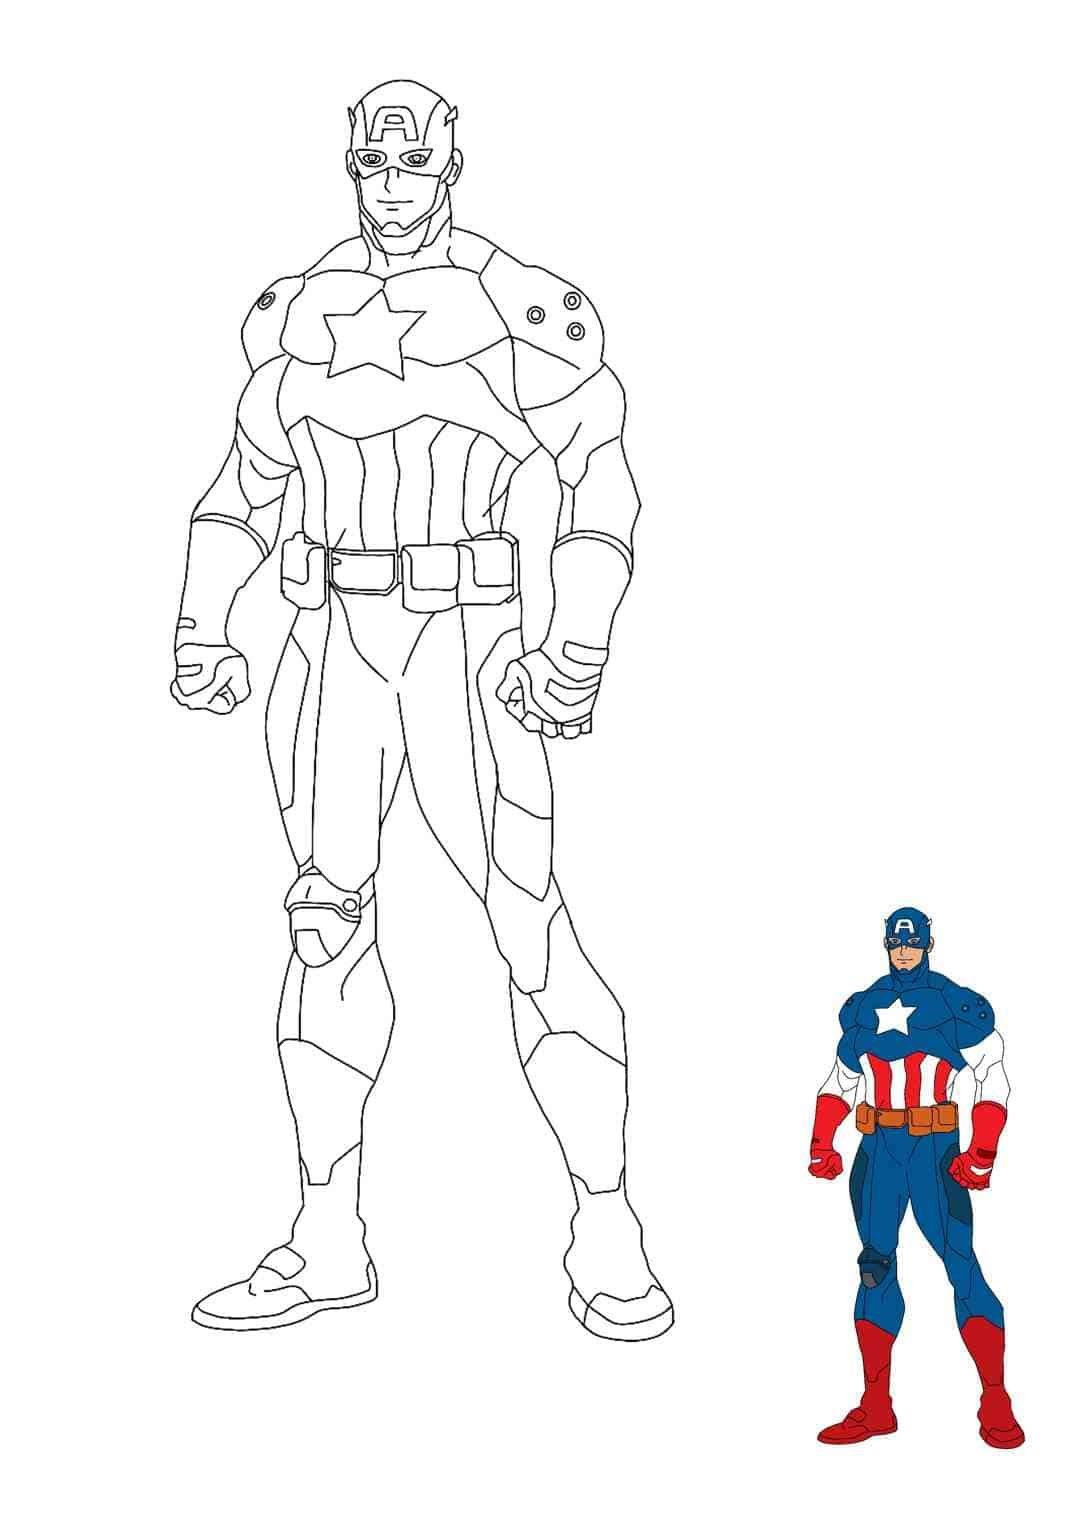 Captain America coloring sheet with a sample